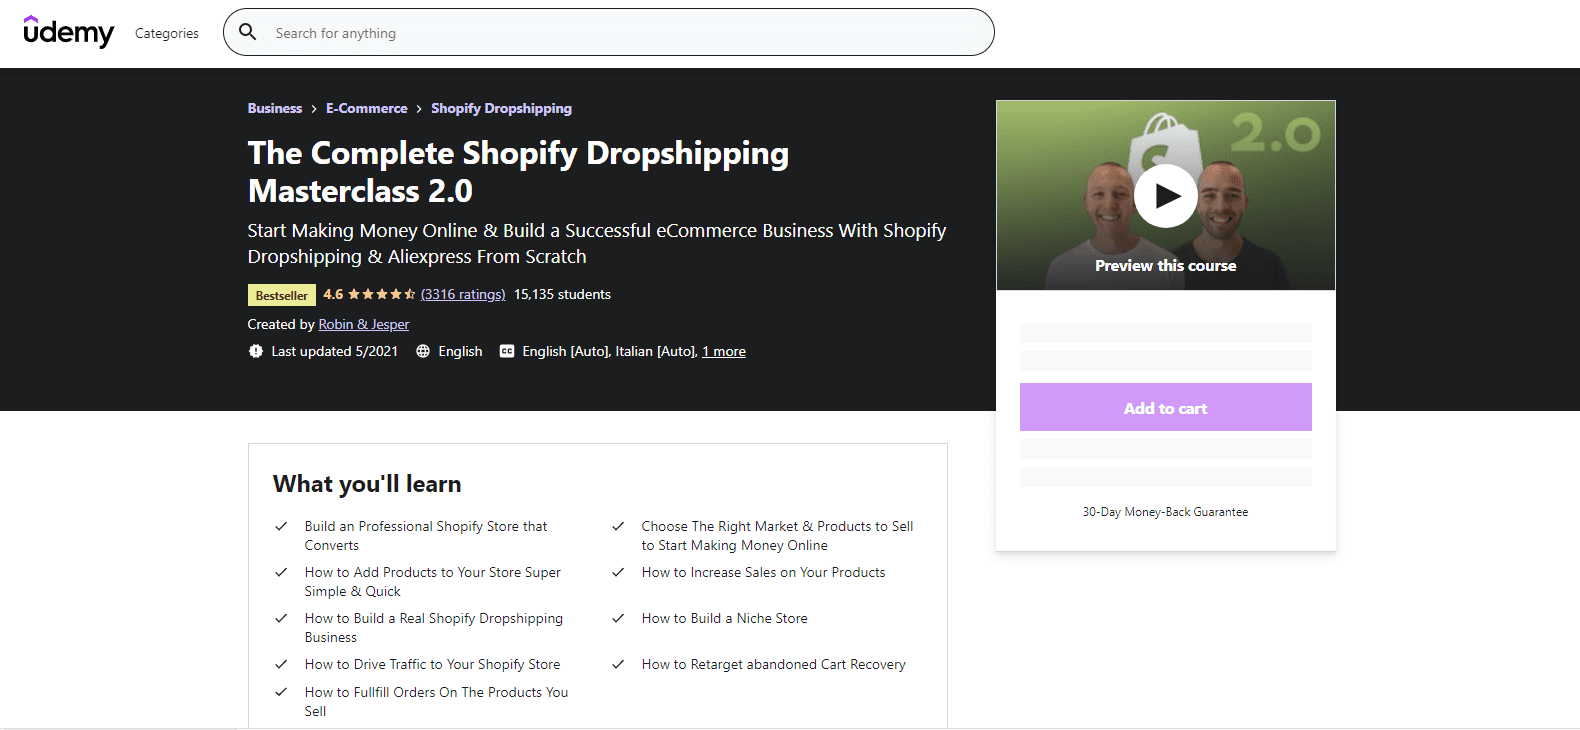 Complete Shopify Dropshipping Masterclass